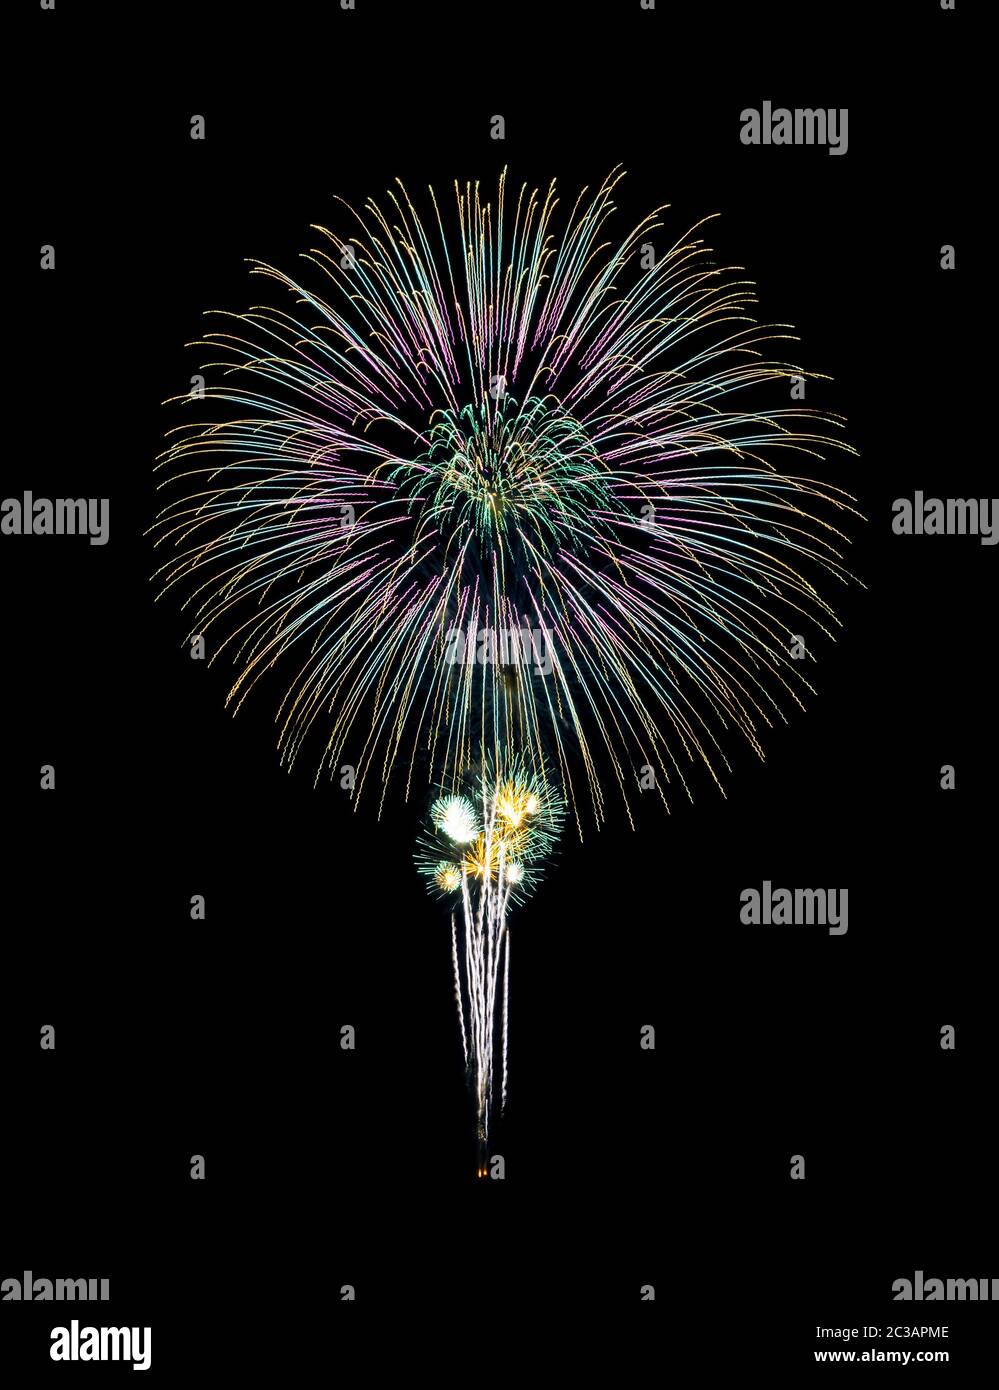 Night fireworks of various colors on black background Stock Photo